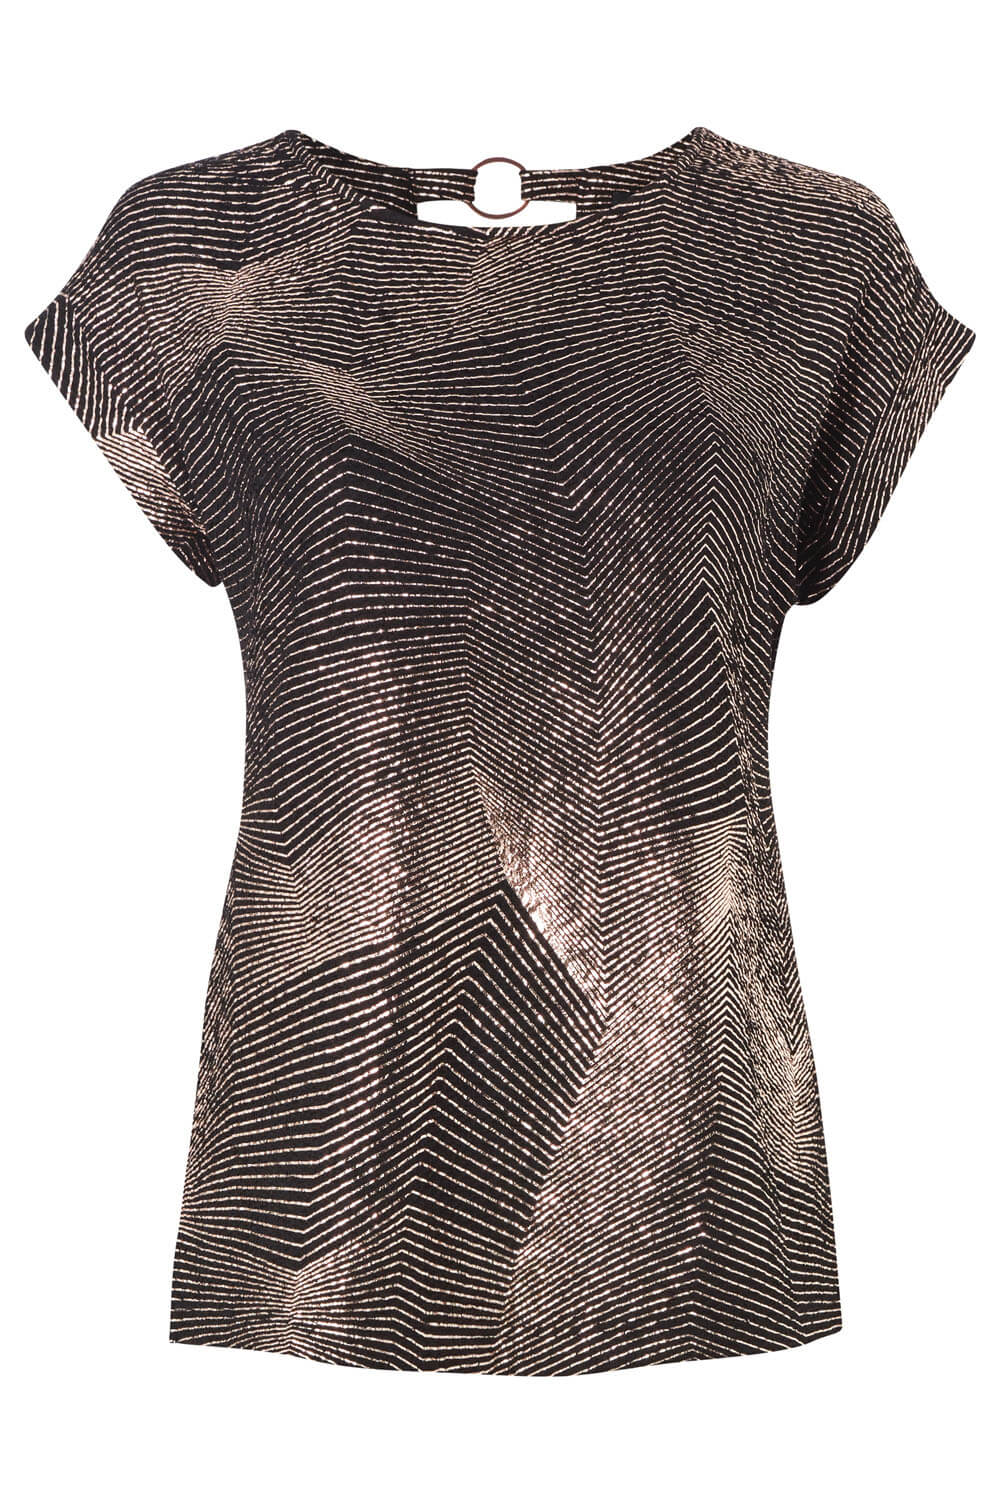 Bronze Abstract Foil Print T-Shirt, Image 5 of 5